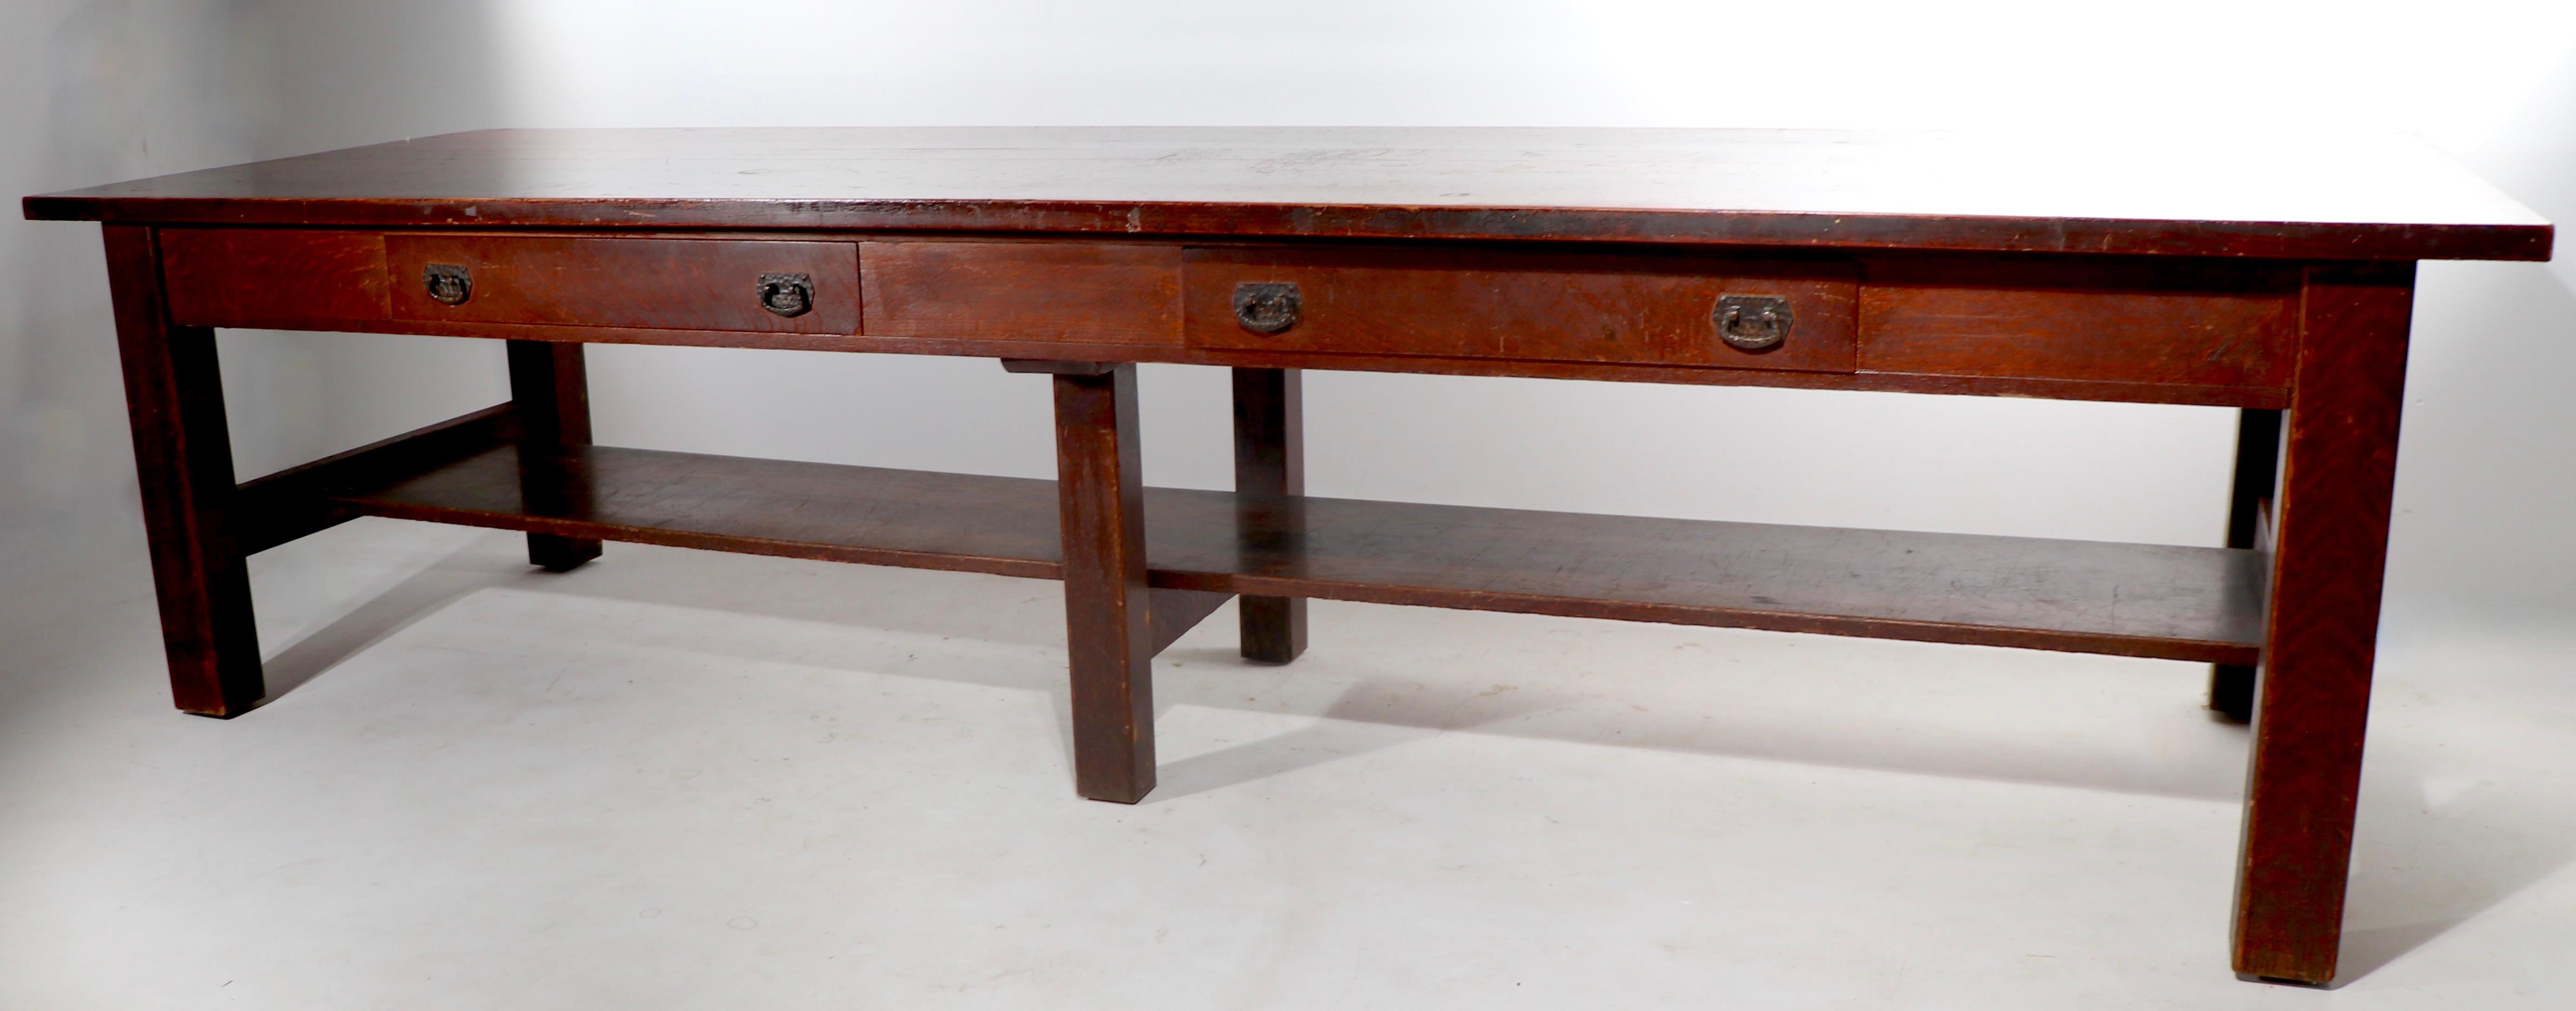 American Massive Arts & Crafts Mission Oak Conference Dining Table by J. M. Young For Sale